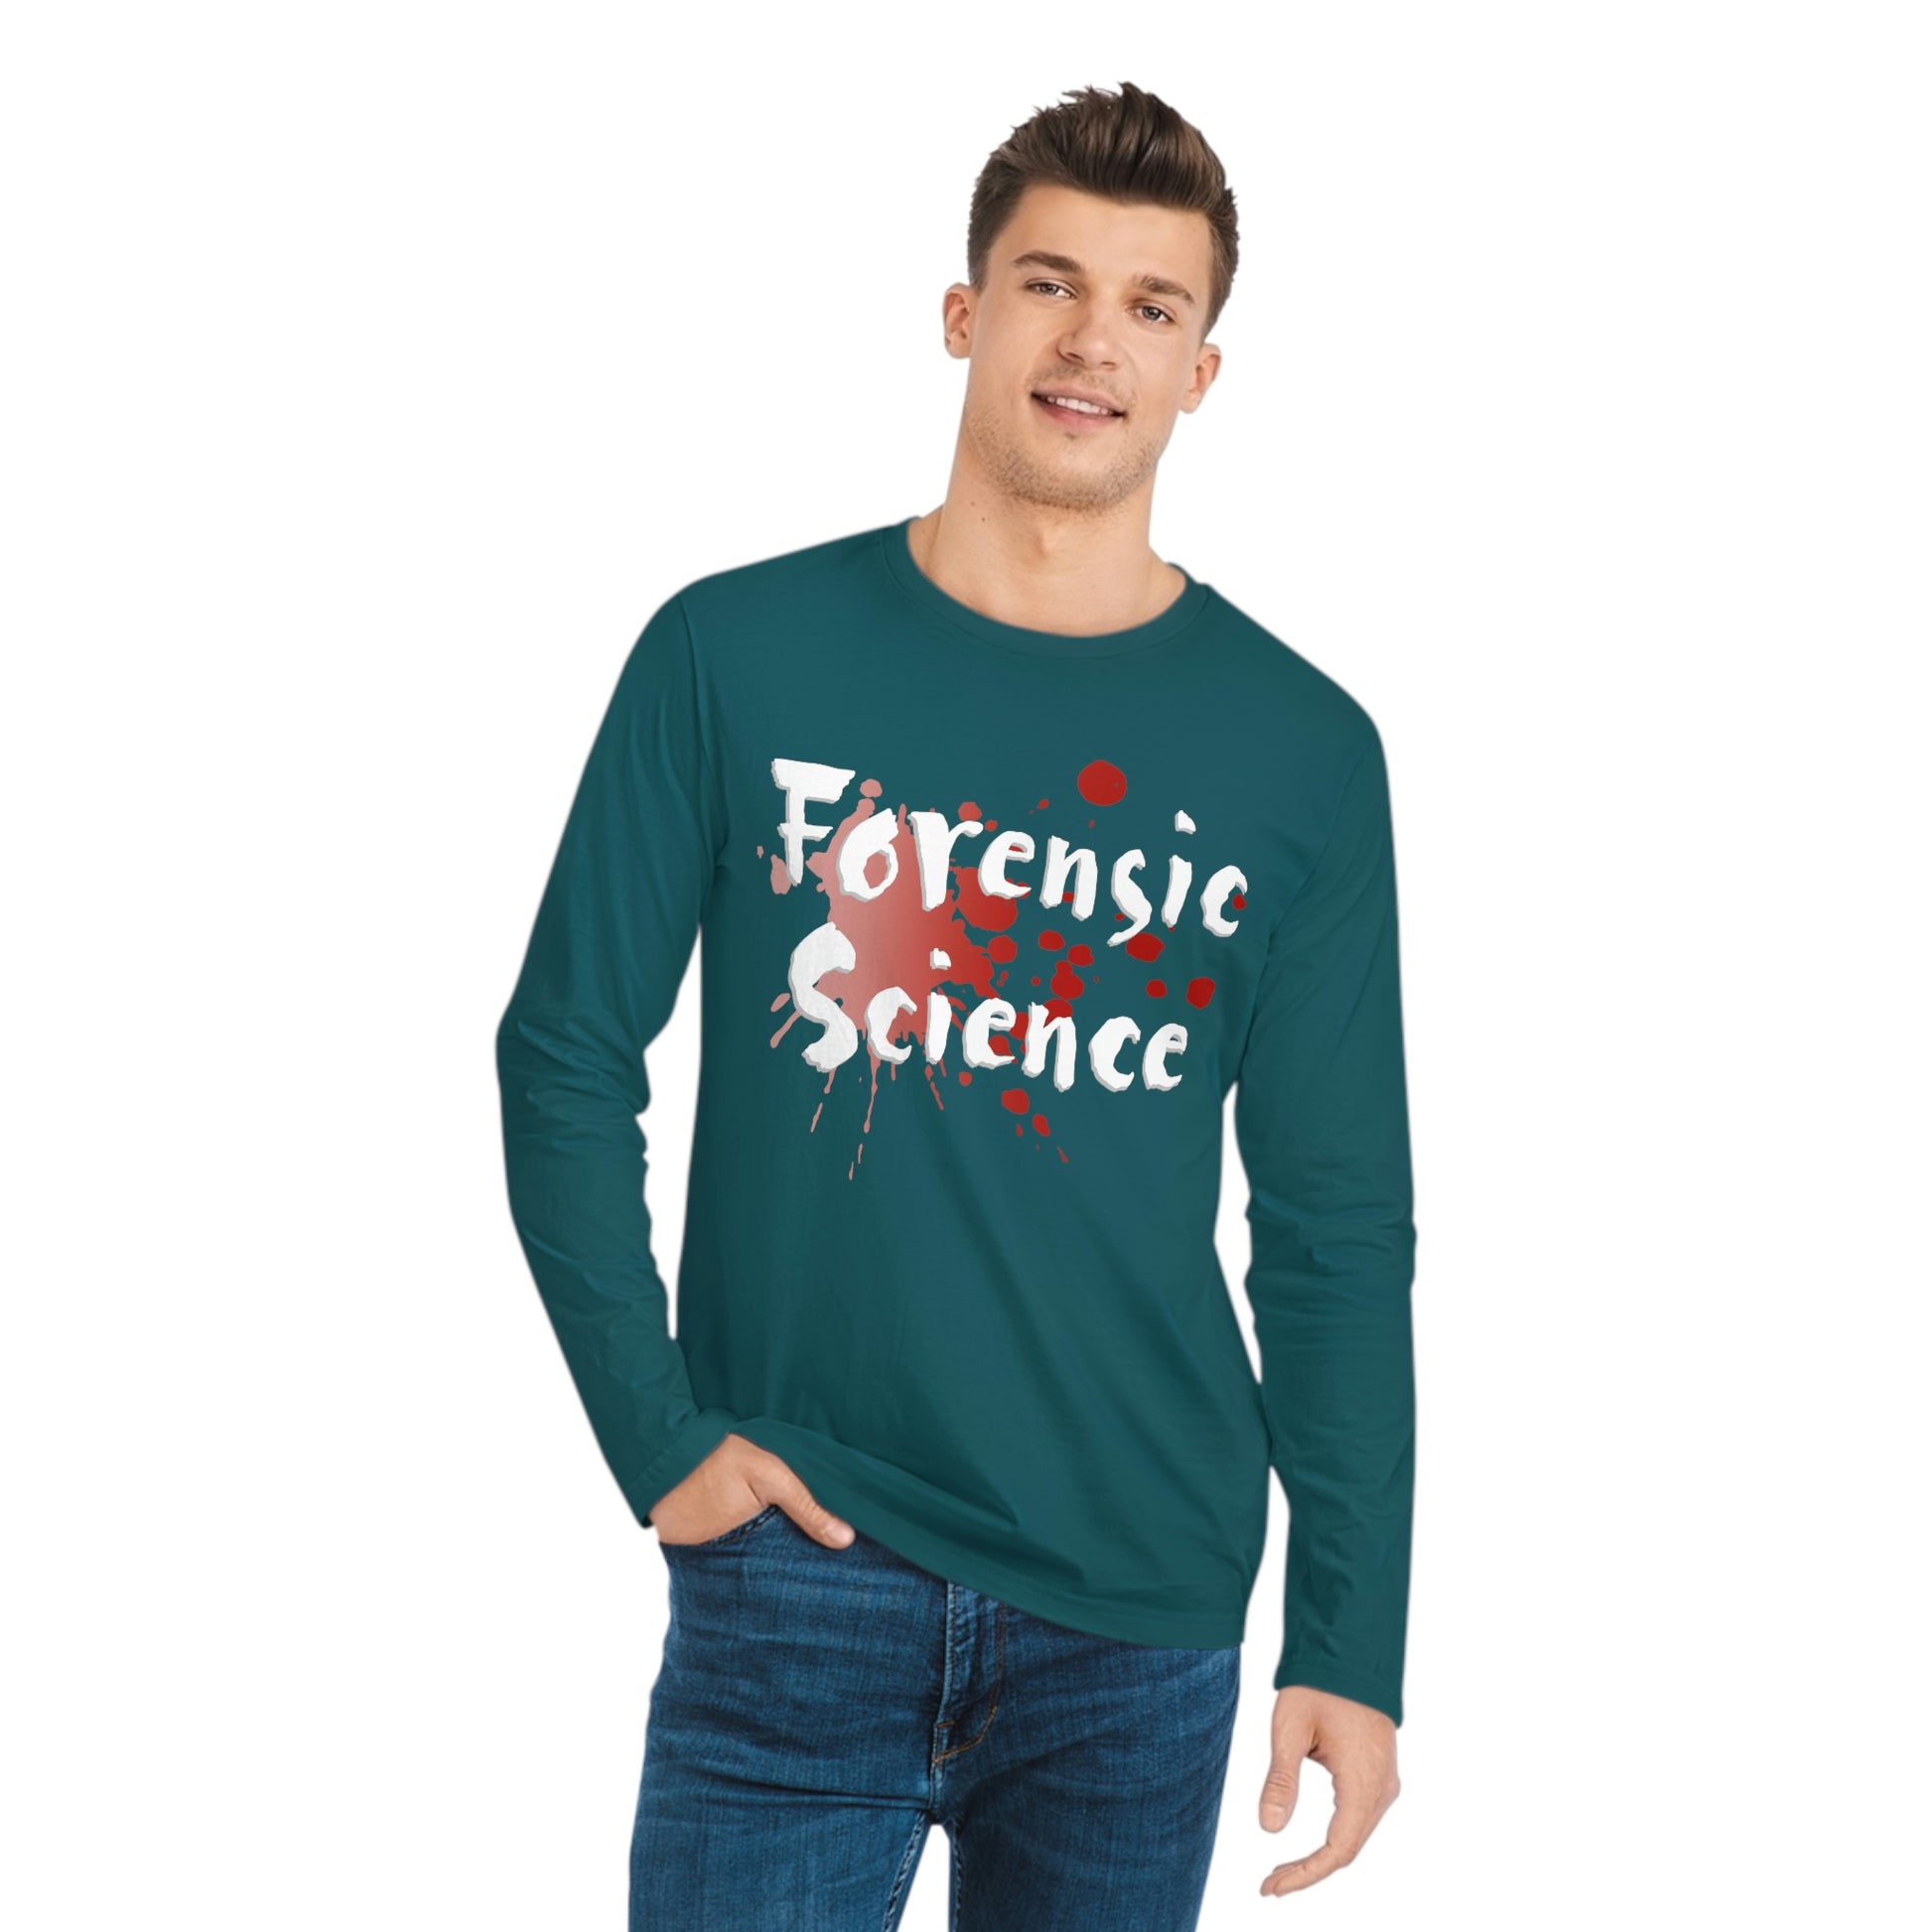 Made from 100% organic, ring-spun, combed cotton for a luxurious feeling of comfort. These personalized long sleeve shirts feature a medium fabric with a medium fit and a set in sleeve, providing a fantastic overall feeling for any time of the day.